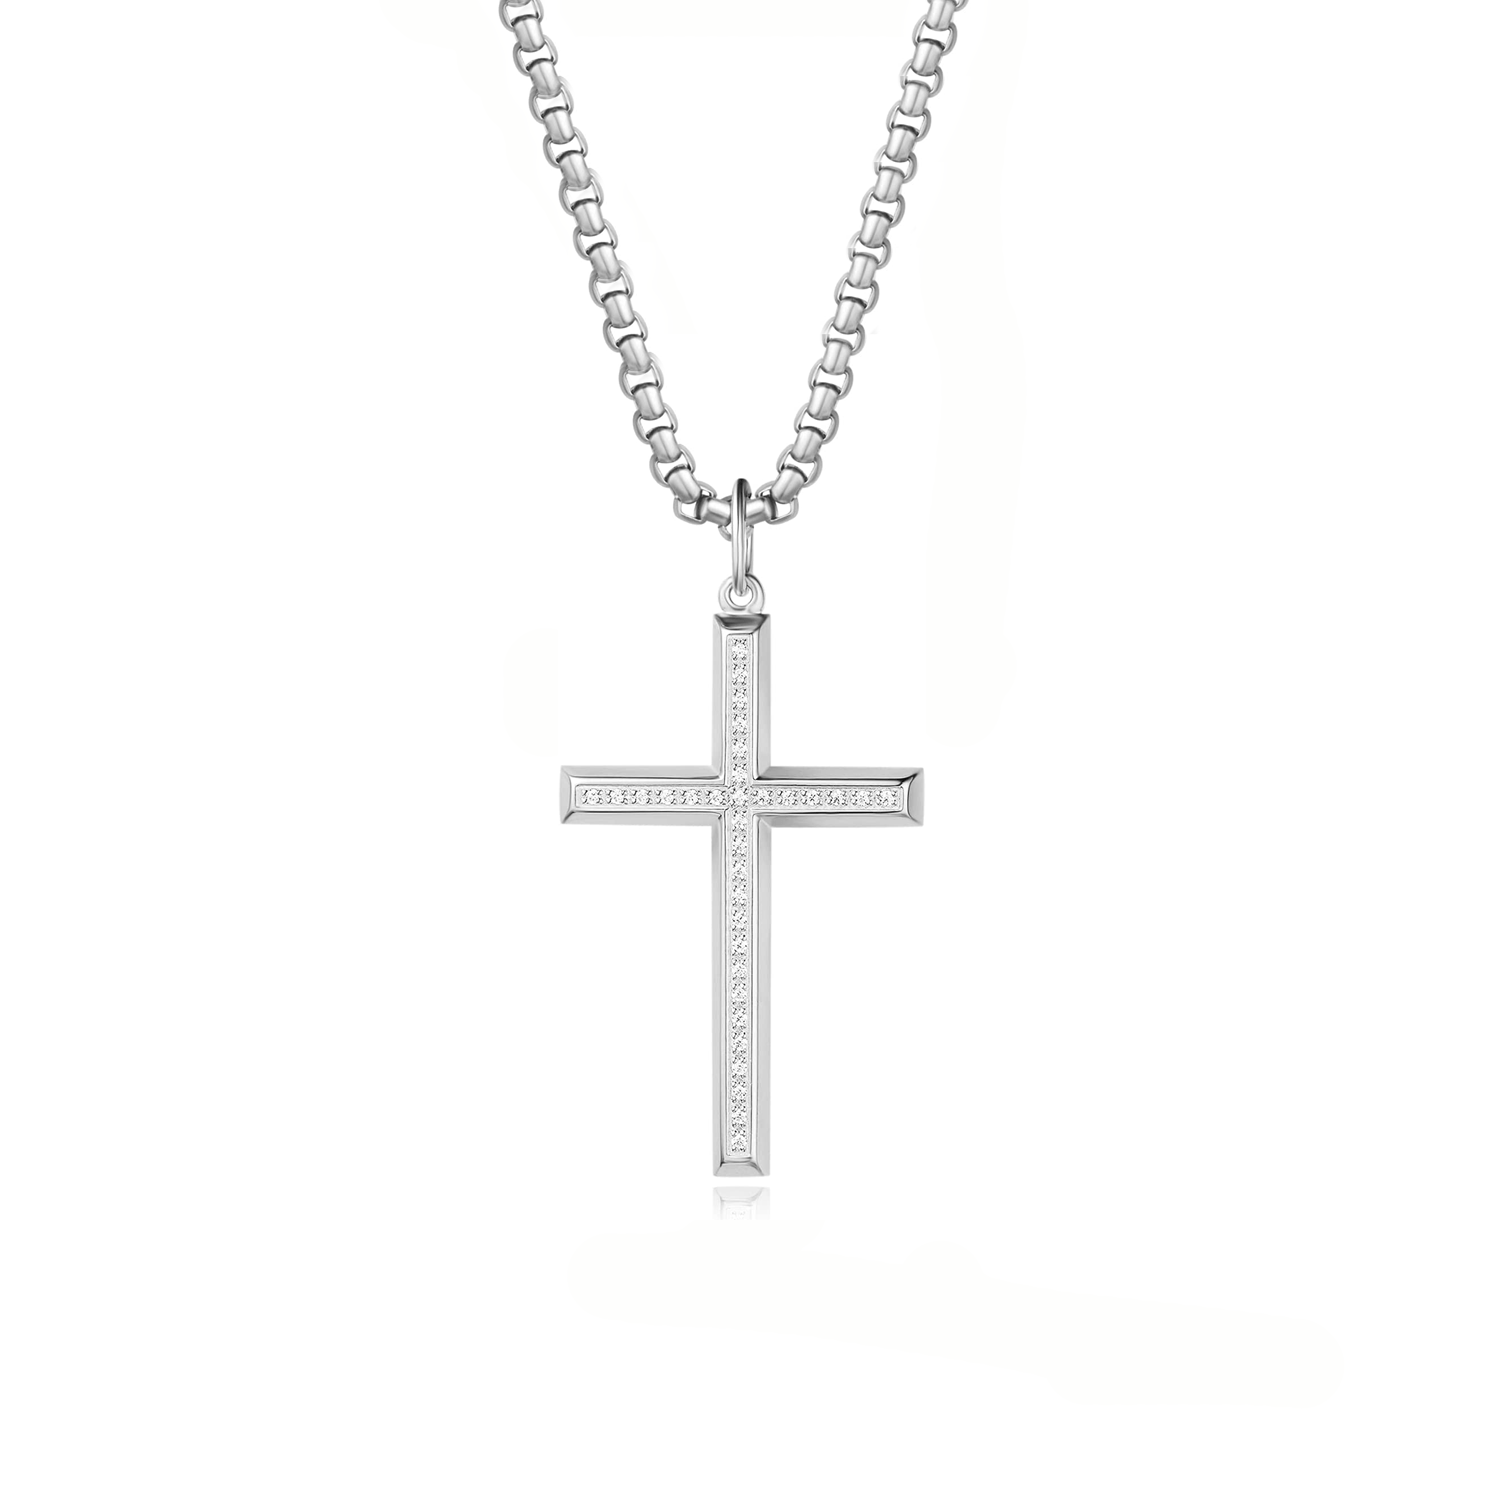 FANCIME Mens Box Chain Beveled Cross 925 Silver Necklace Main